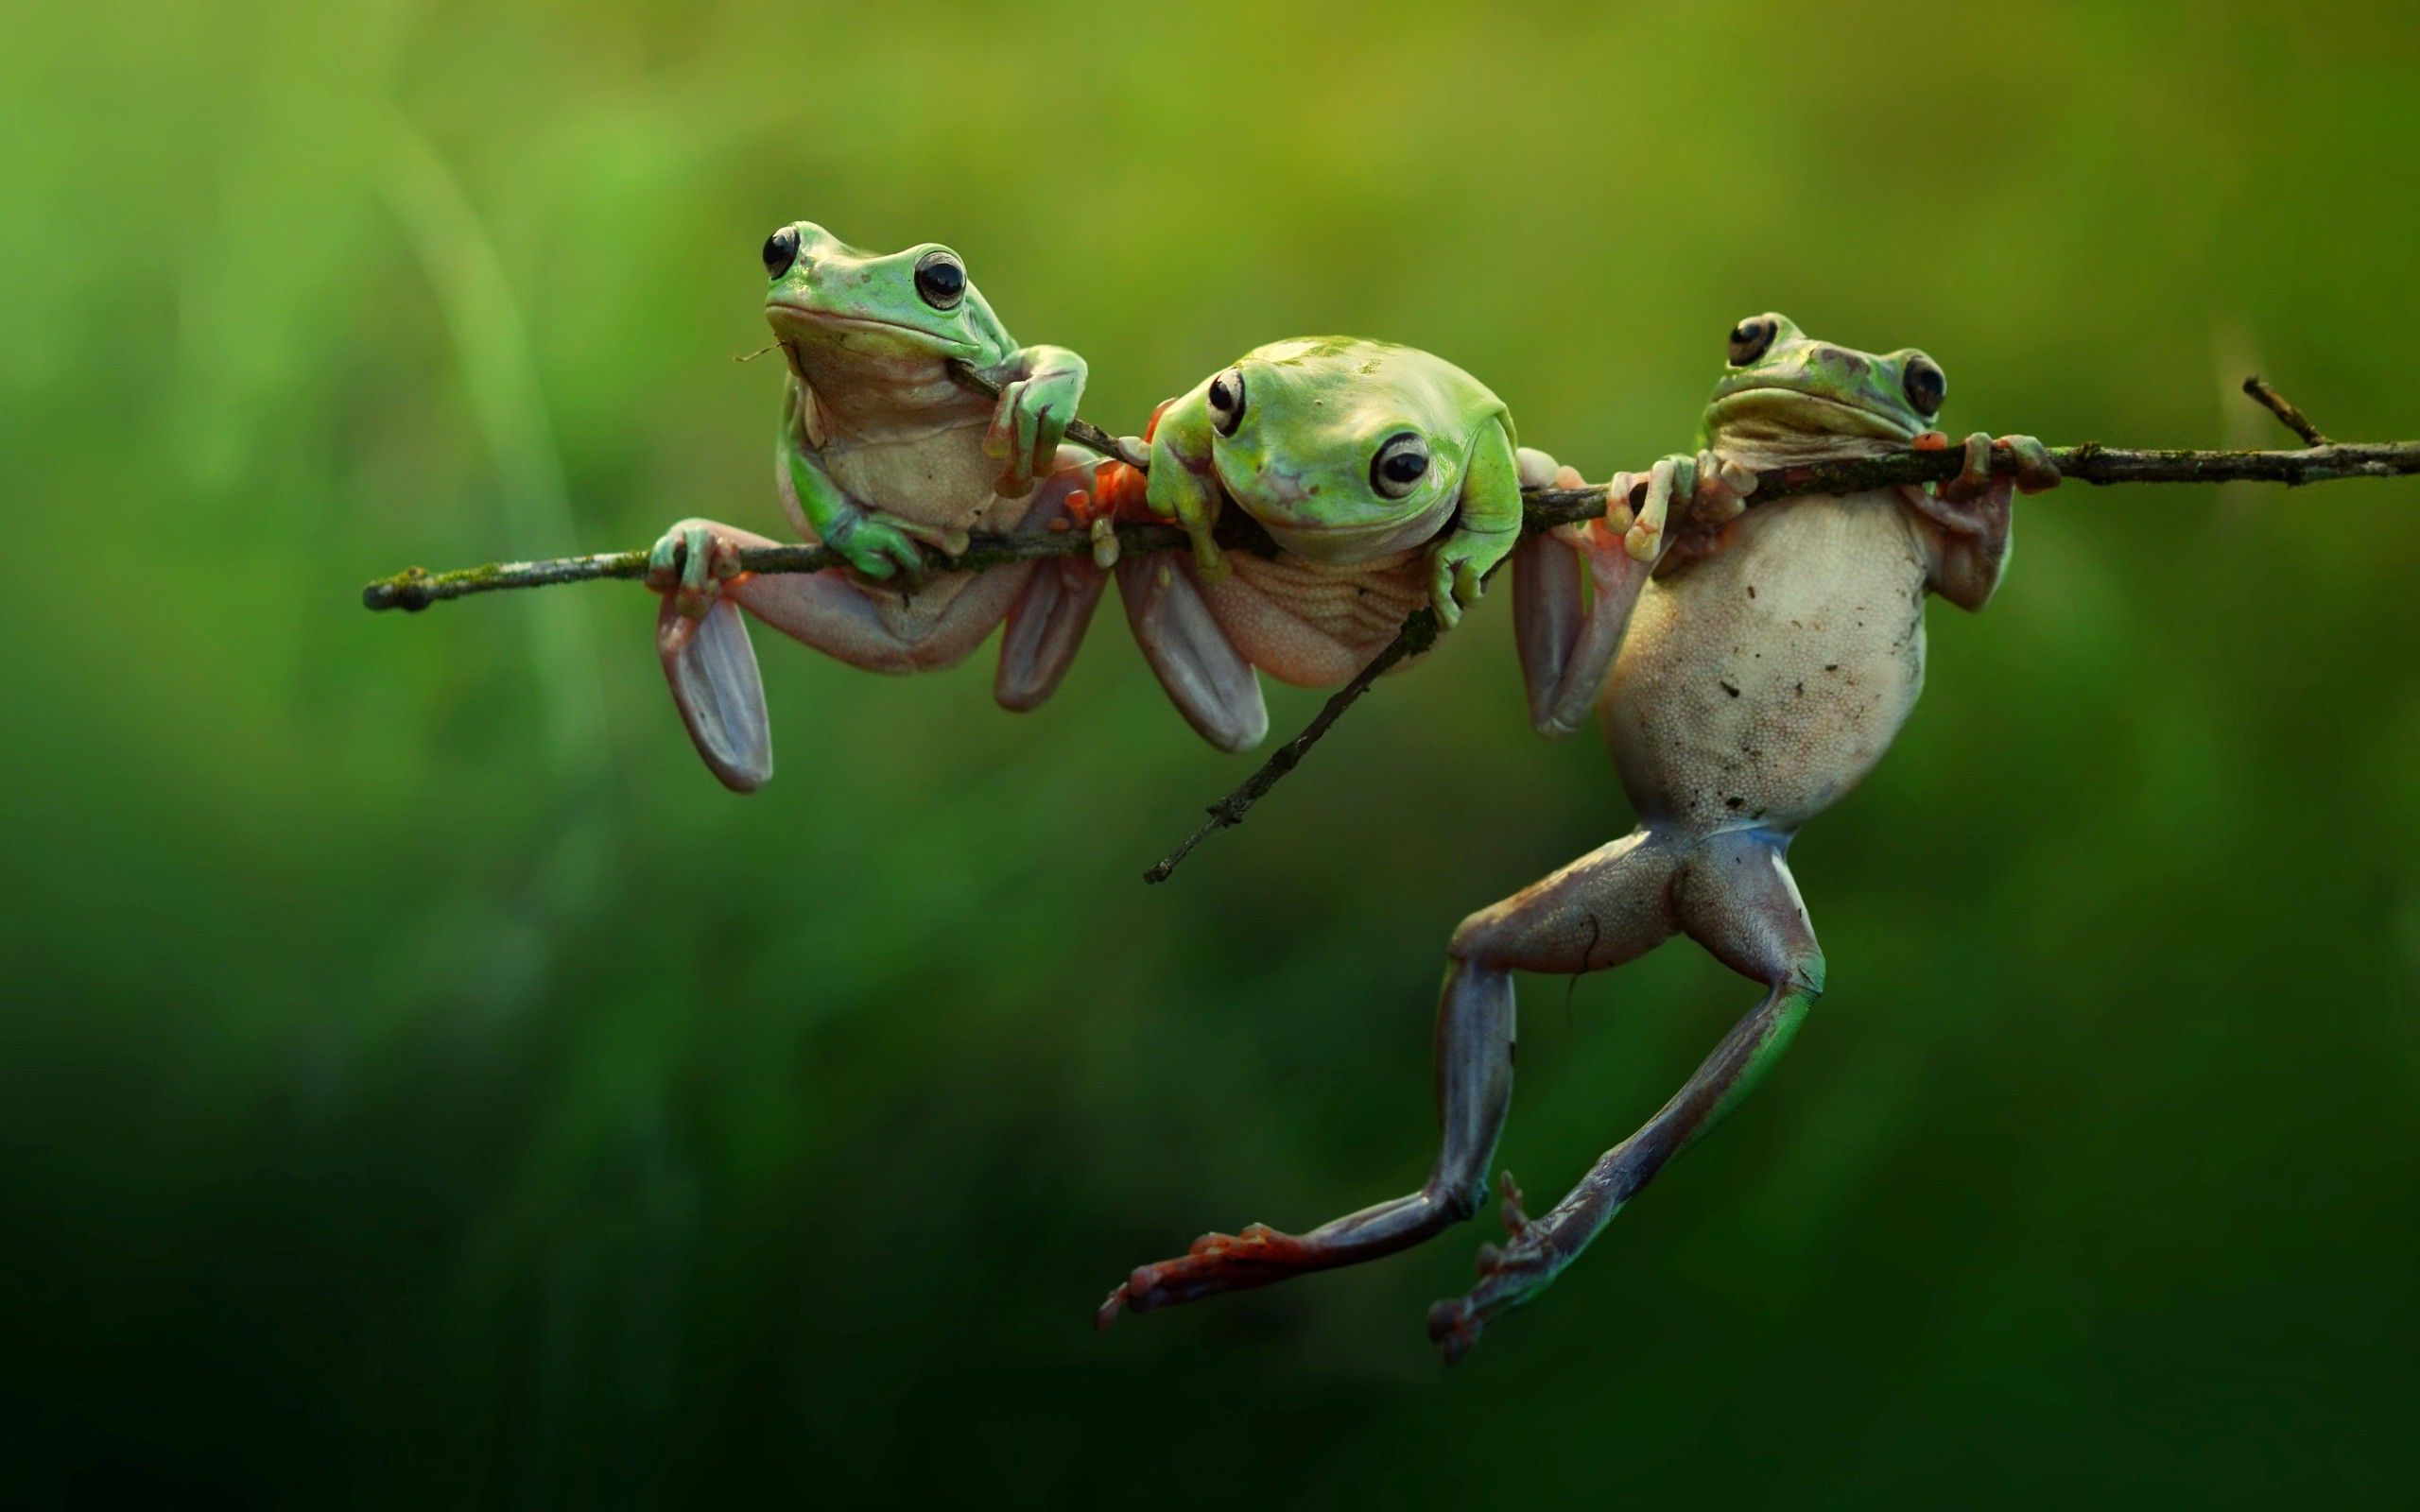 2560x1600 Frog Animals Nature Amphibian Twigs Wallpaper Hd Desktop And Mobile Background